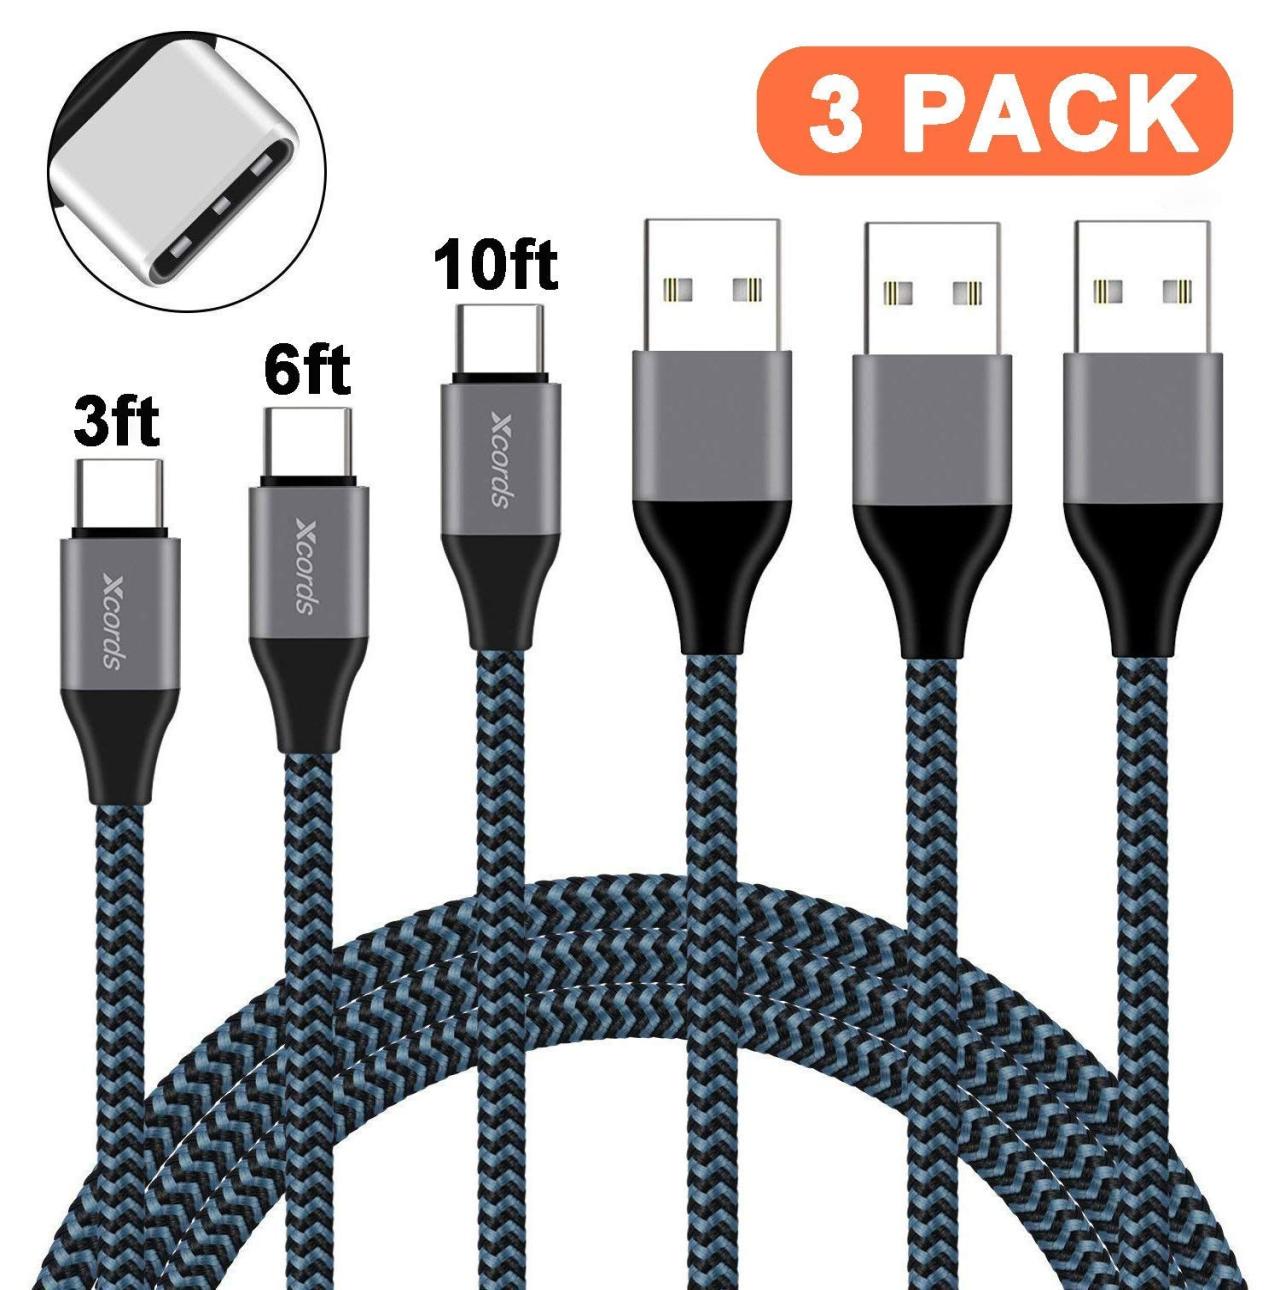 Suanna MFi Certified iPhone Charger 4Pack 3FT 6FT 6FT 10FT Extra Long Nylon Braided USB Charging & Syncing Cord Compatible iPhone Xs/Max/XR/X/8/8Plus/7/7Plus/6S/6S Plus/SE/iPad/Nan Gold 